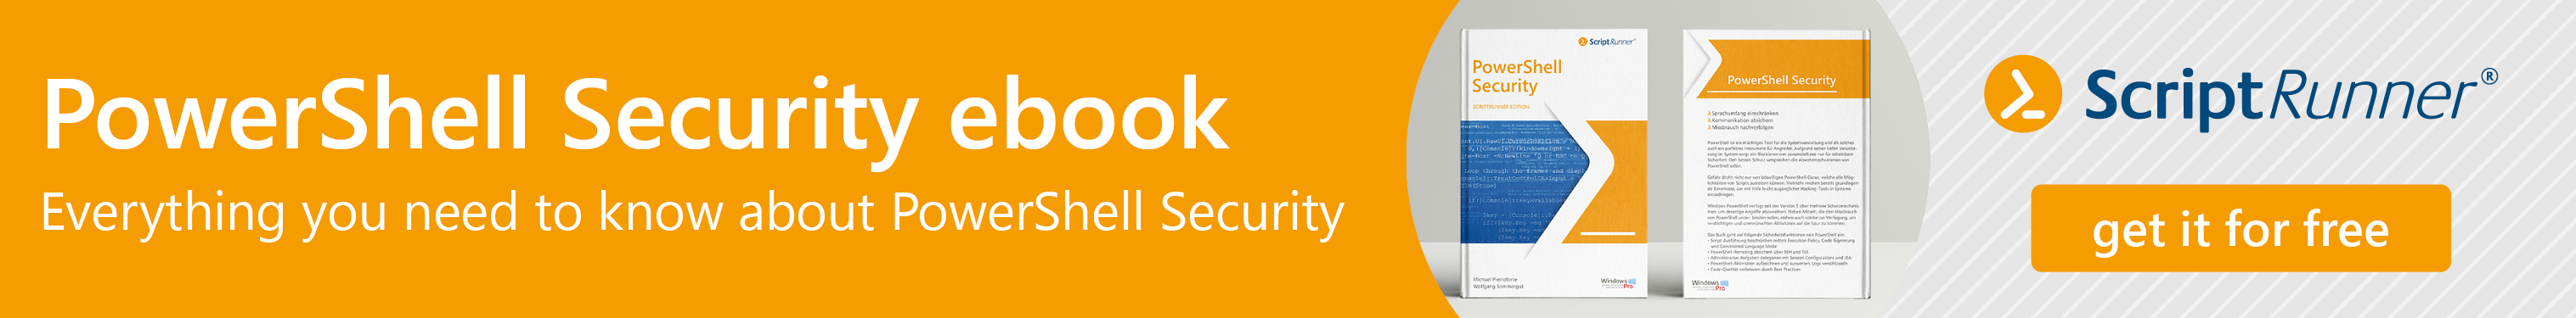 PowerShell Security Ebook - Everything you need to know about PowerShell Security. Get it fo free!